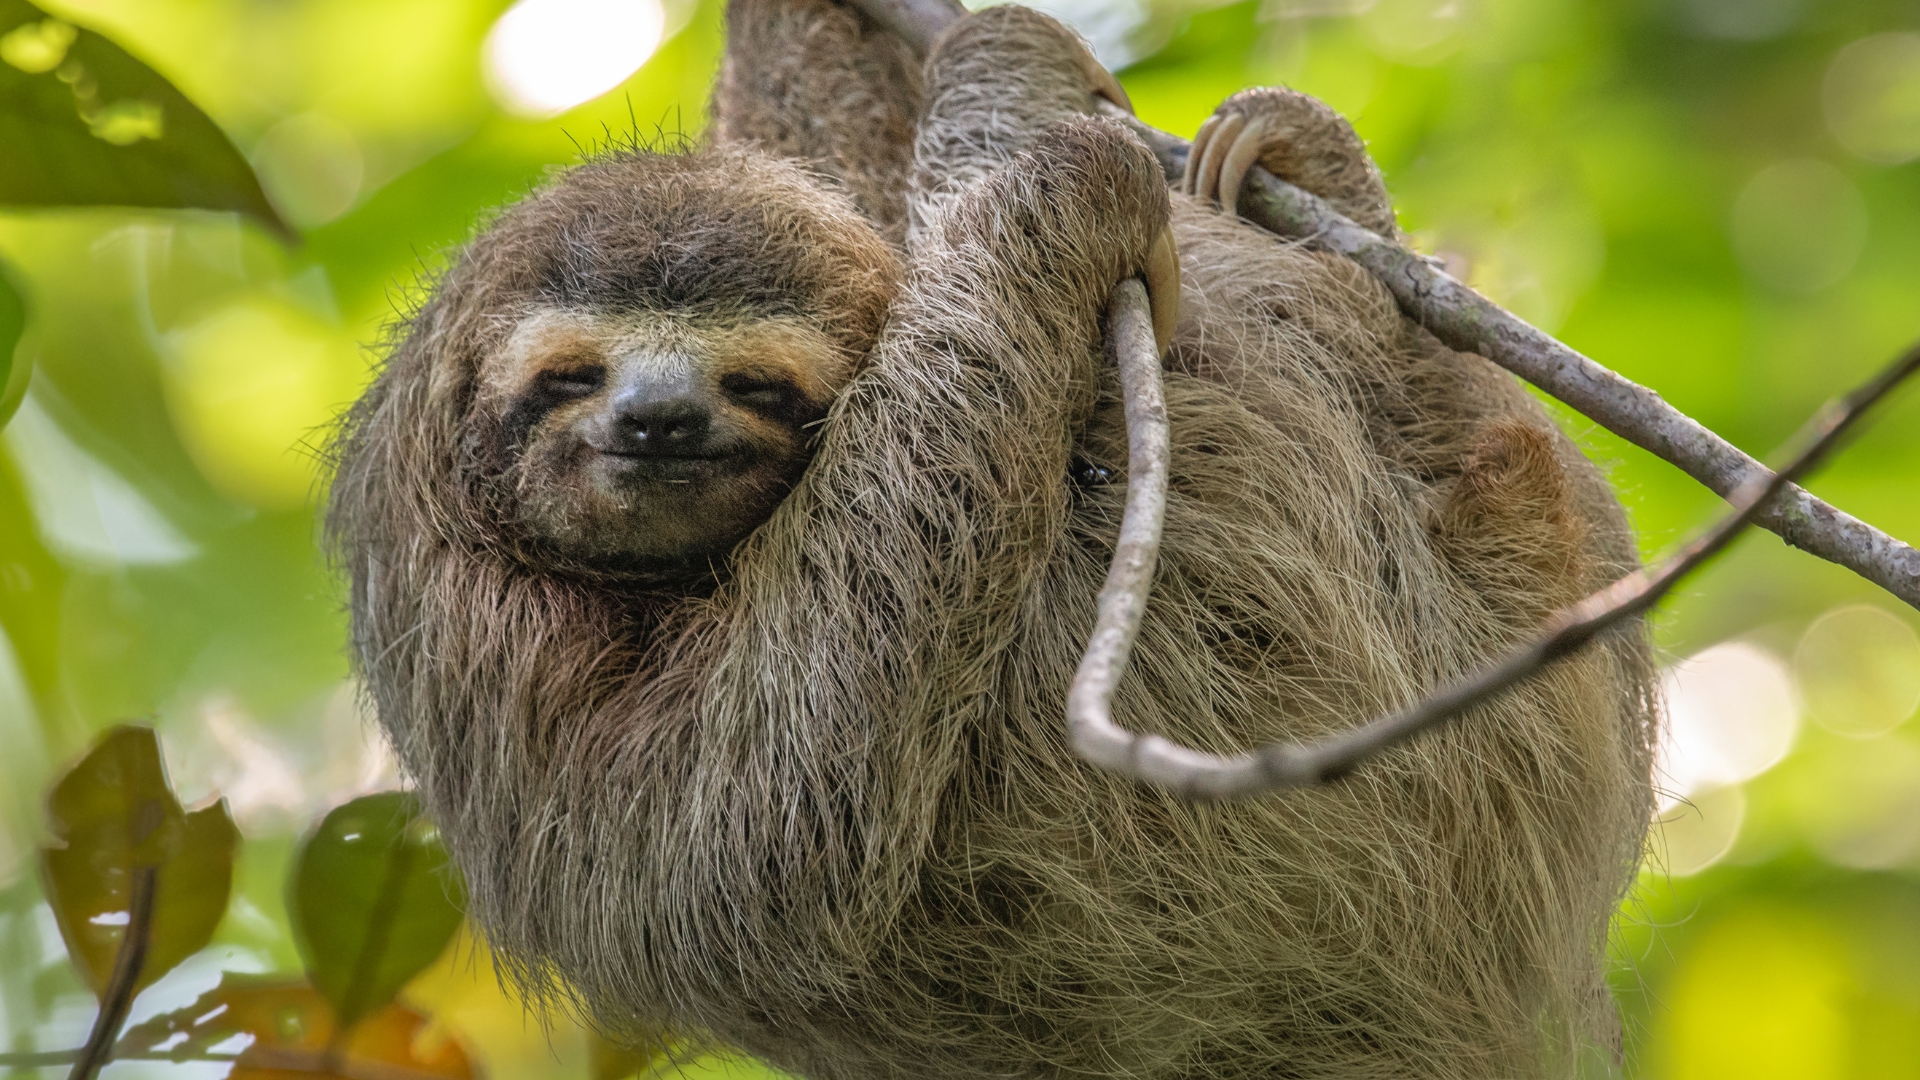 Sloth hanging in a tree in the jungles of Costa Rica.